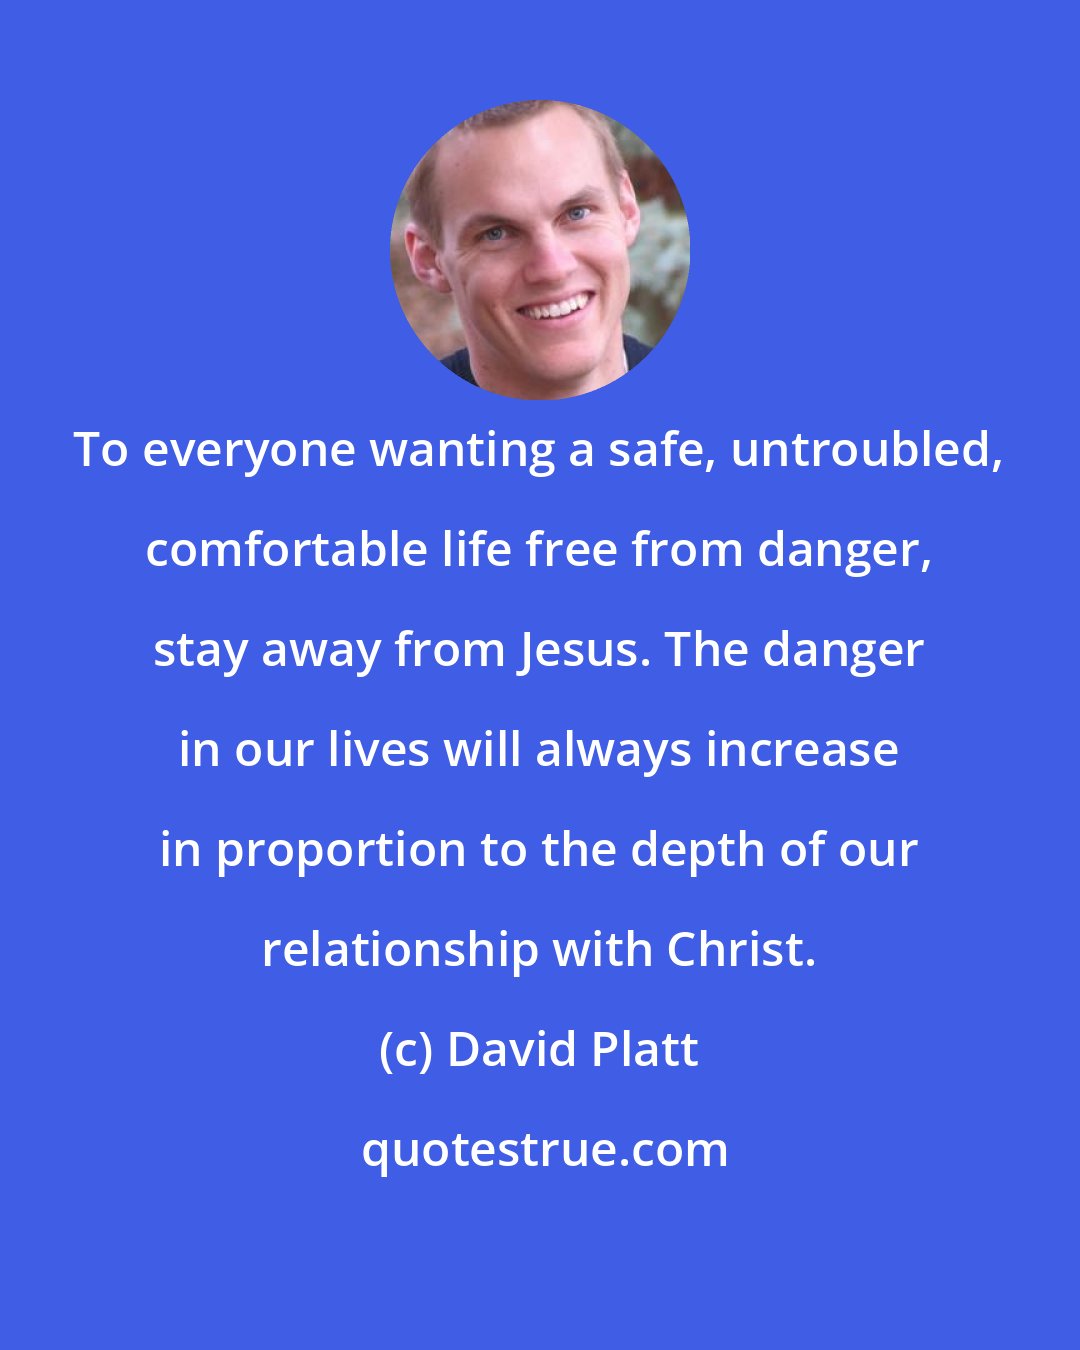 David Platt: To everyone wanting a safe, untroubled, comfortable life free from danger, stay away from Jesus. The danger in our lives will always increase in proportion to the depth of our relationship with Christ.